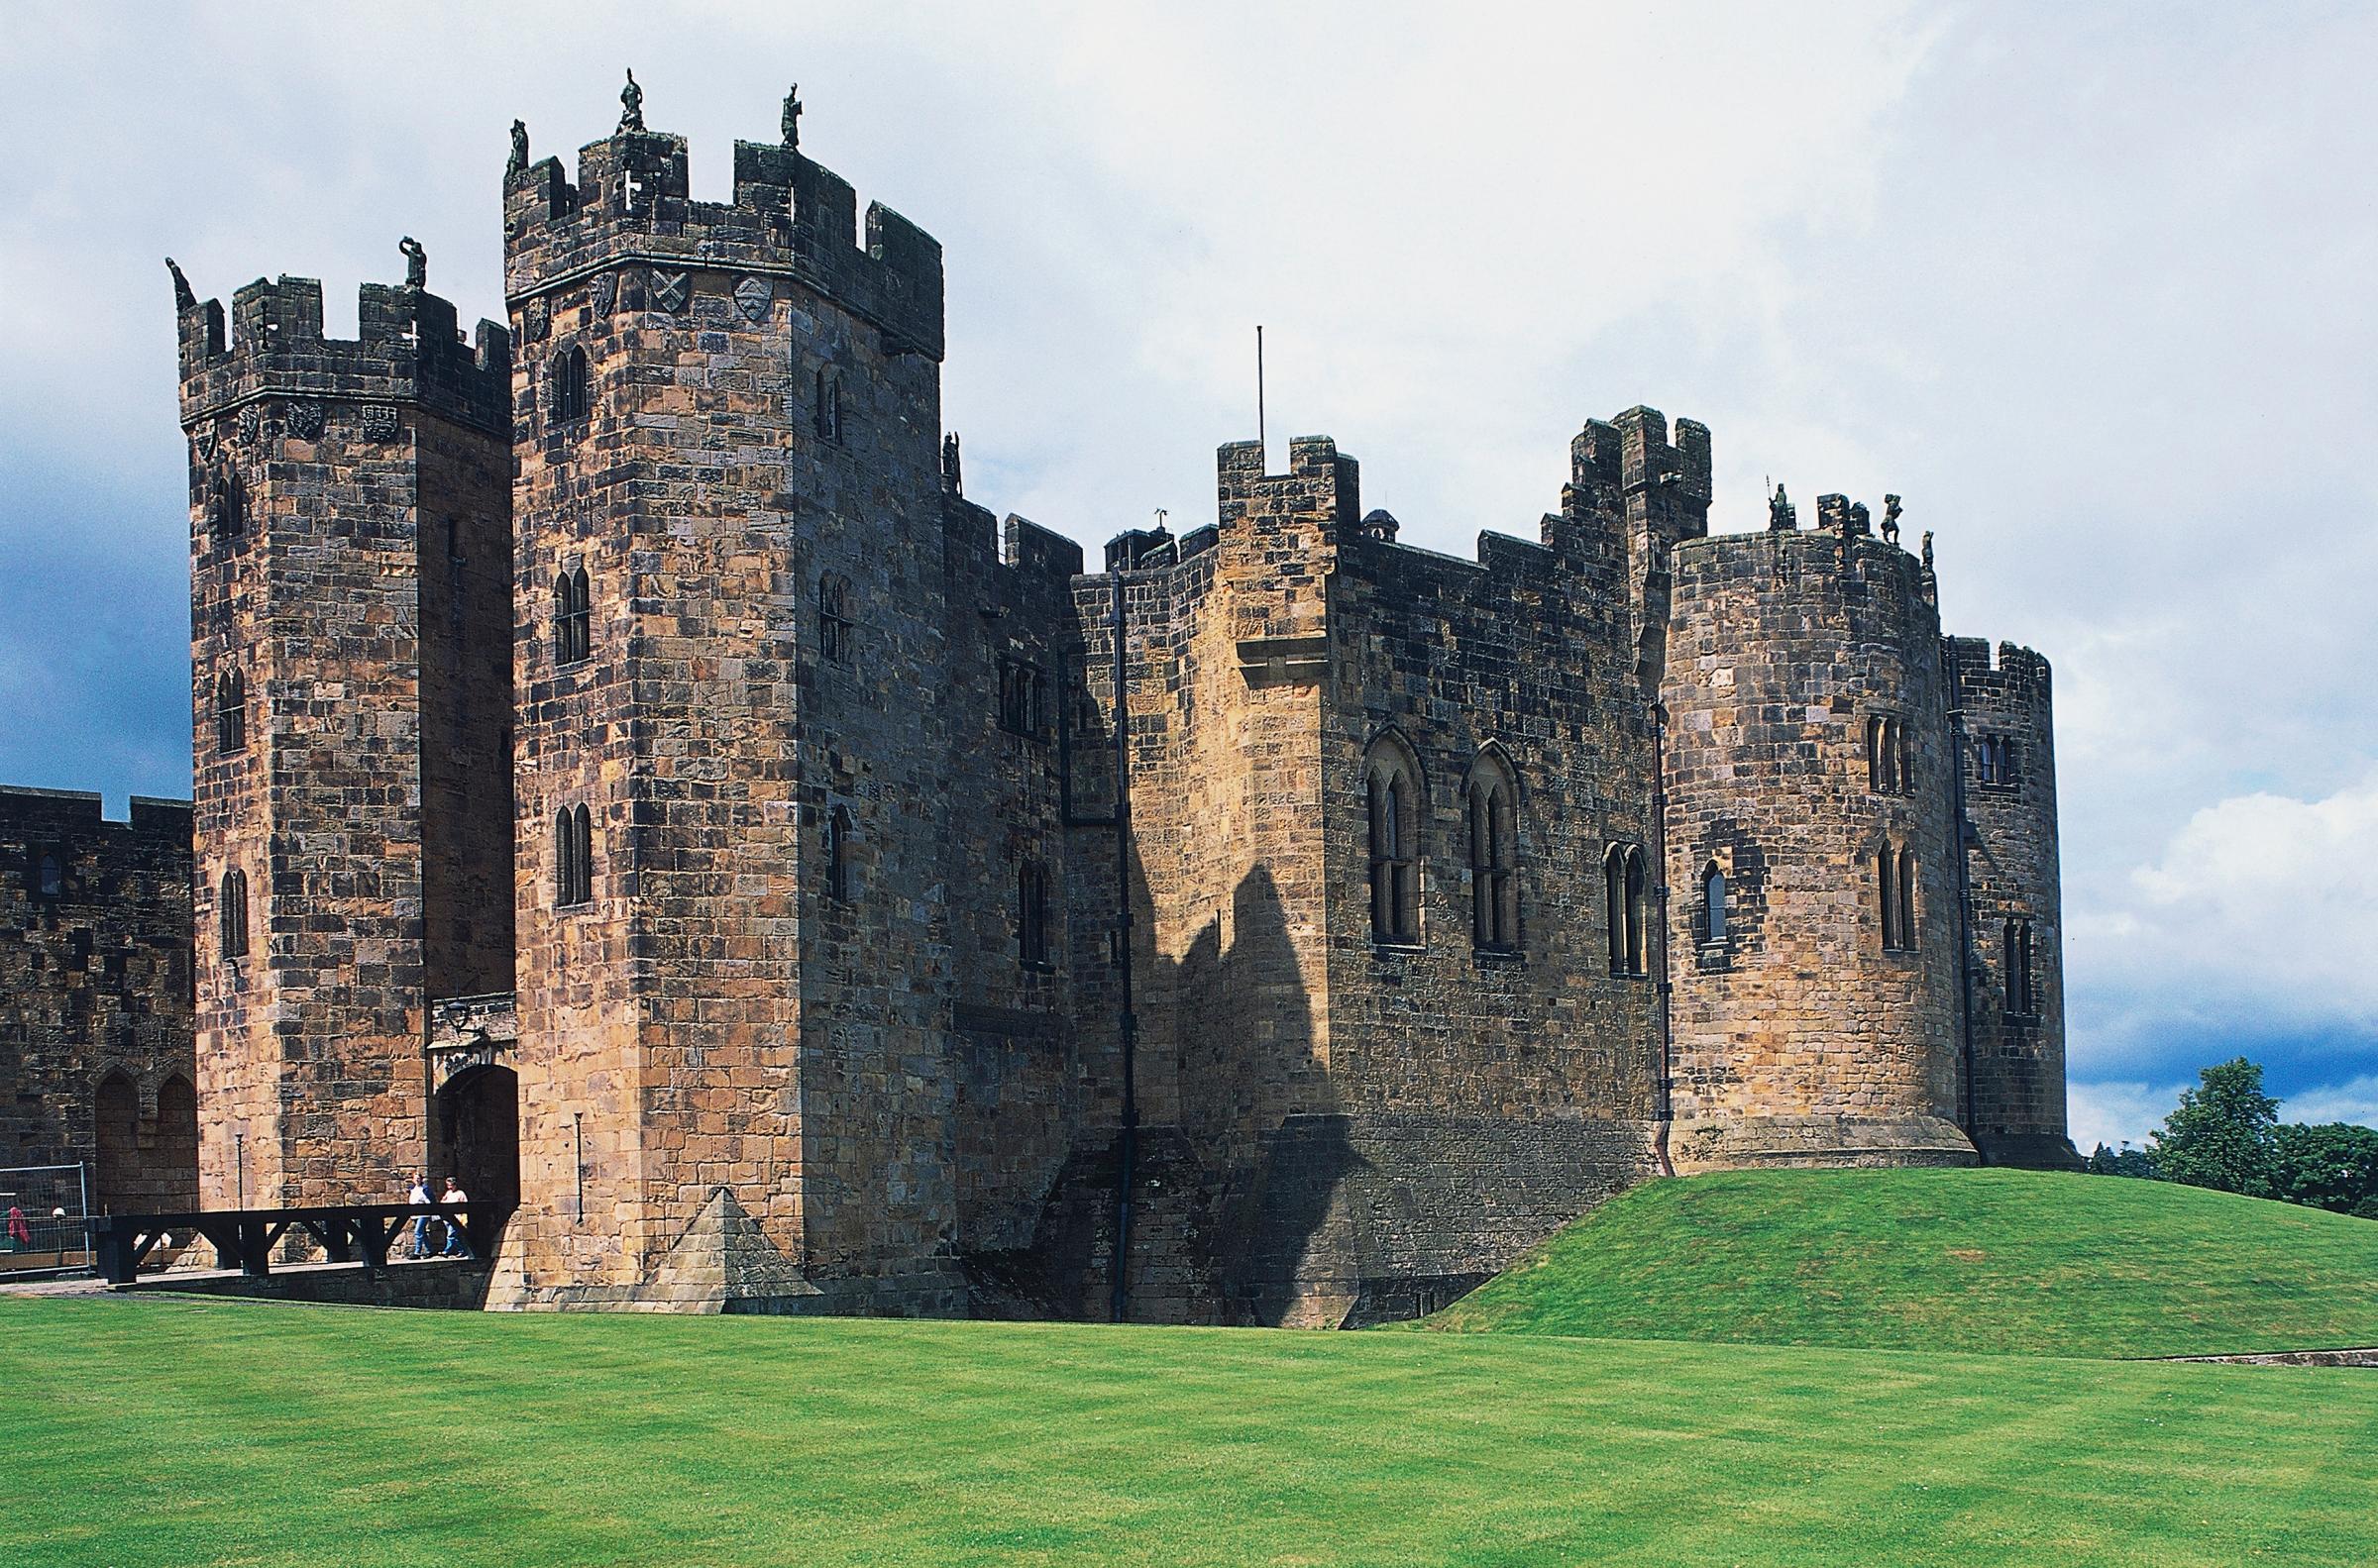 Alnwick Castle in Northumberland, England. This Medieval castle was used as a set for the fictional Hogwarts School for Witchcraft and Wizardry in the first two Harry Potter films. You'll see Alnwick in familiar scenes like Harry's first broomstick flying lesson in 'Harry Potter and the Sorcerer's Stone' or Ron's flying car crash in 'Harry Potter and the Chamber of Secrets.'